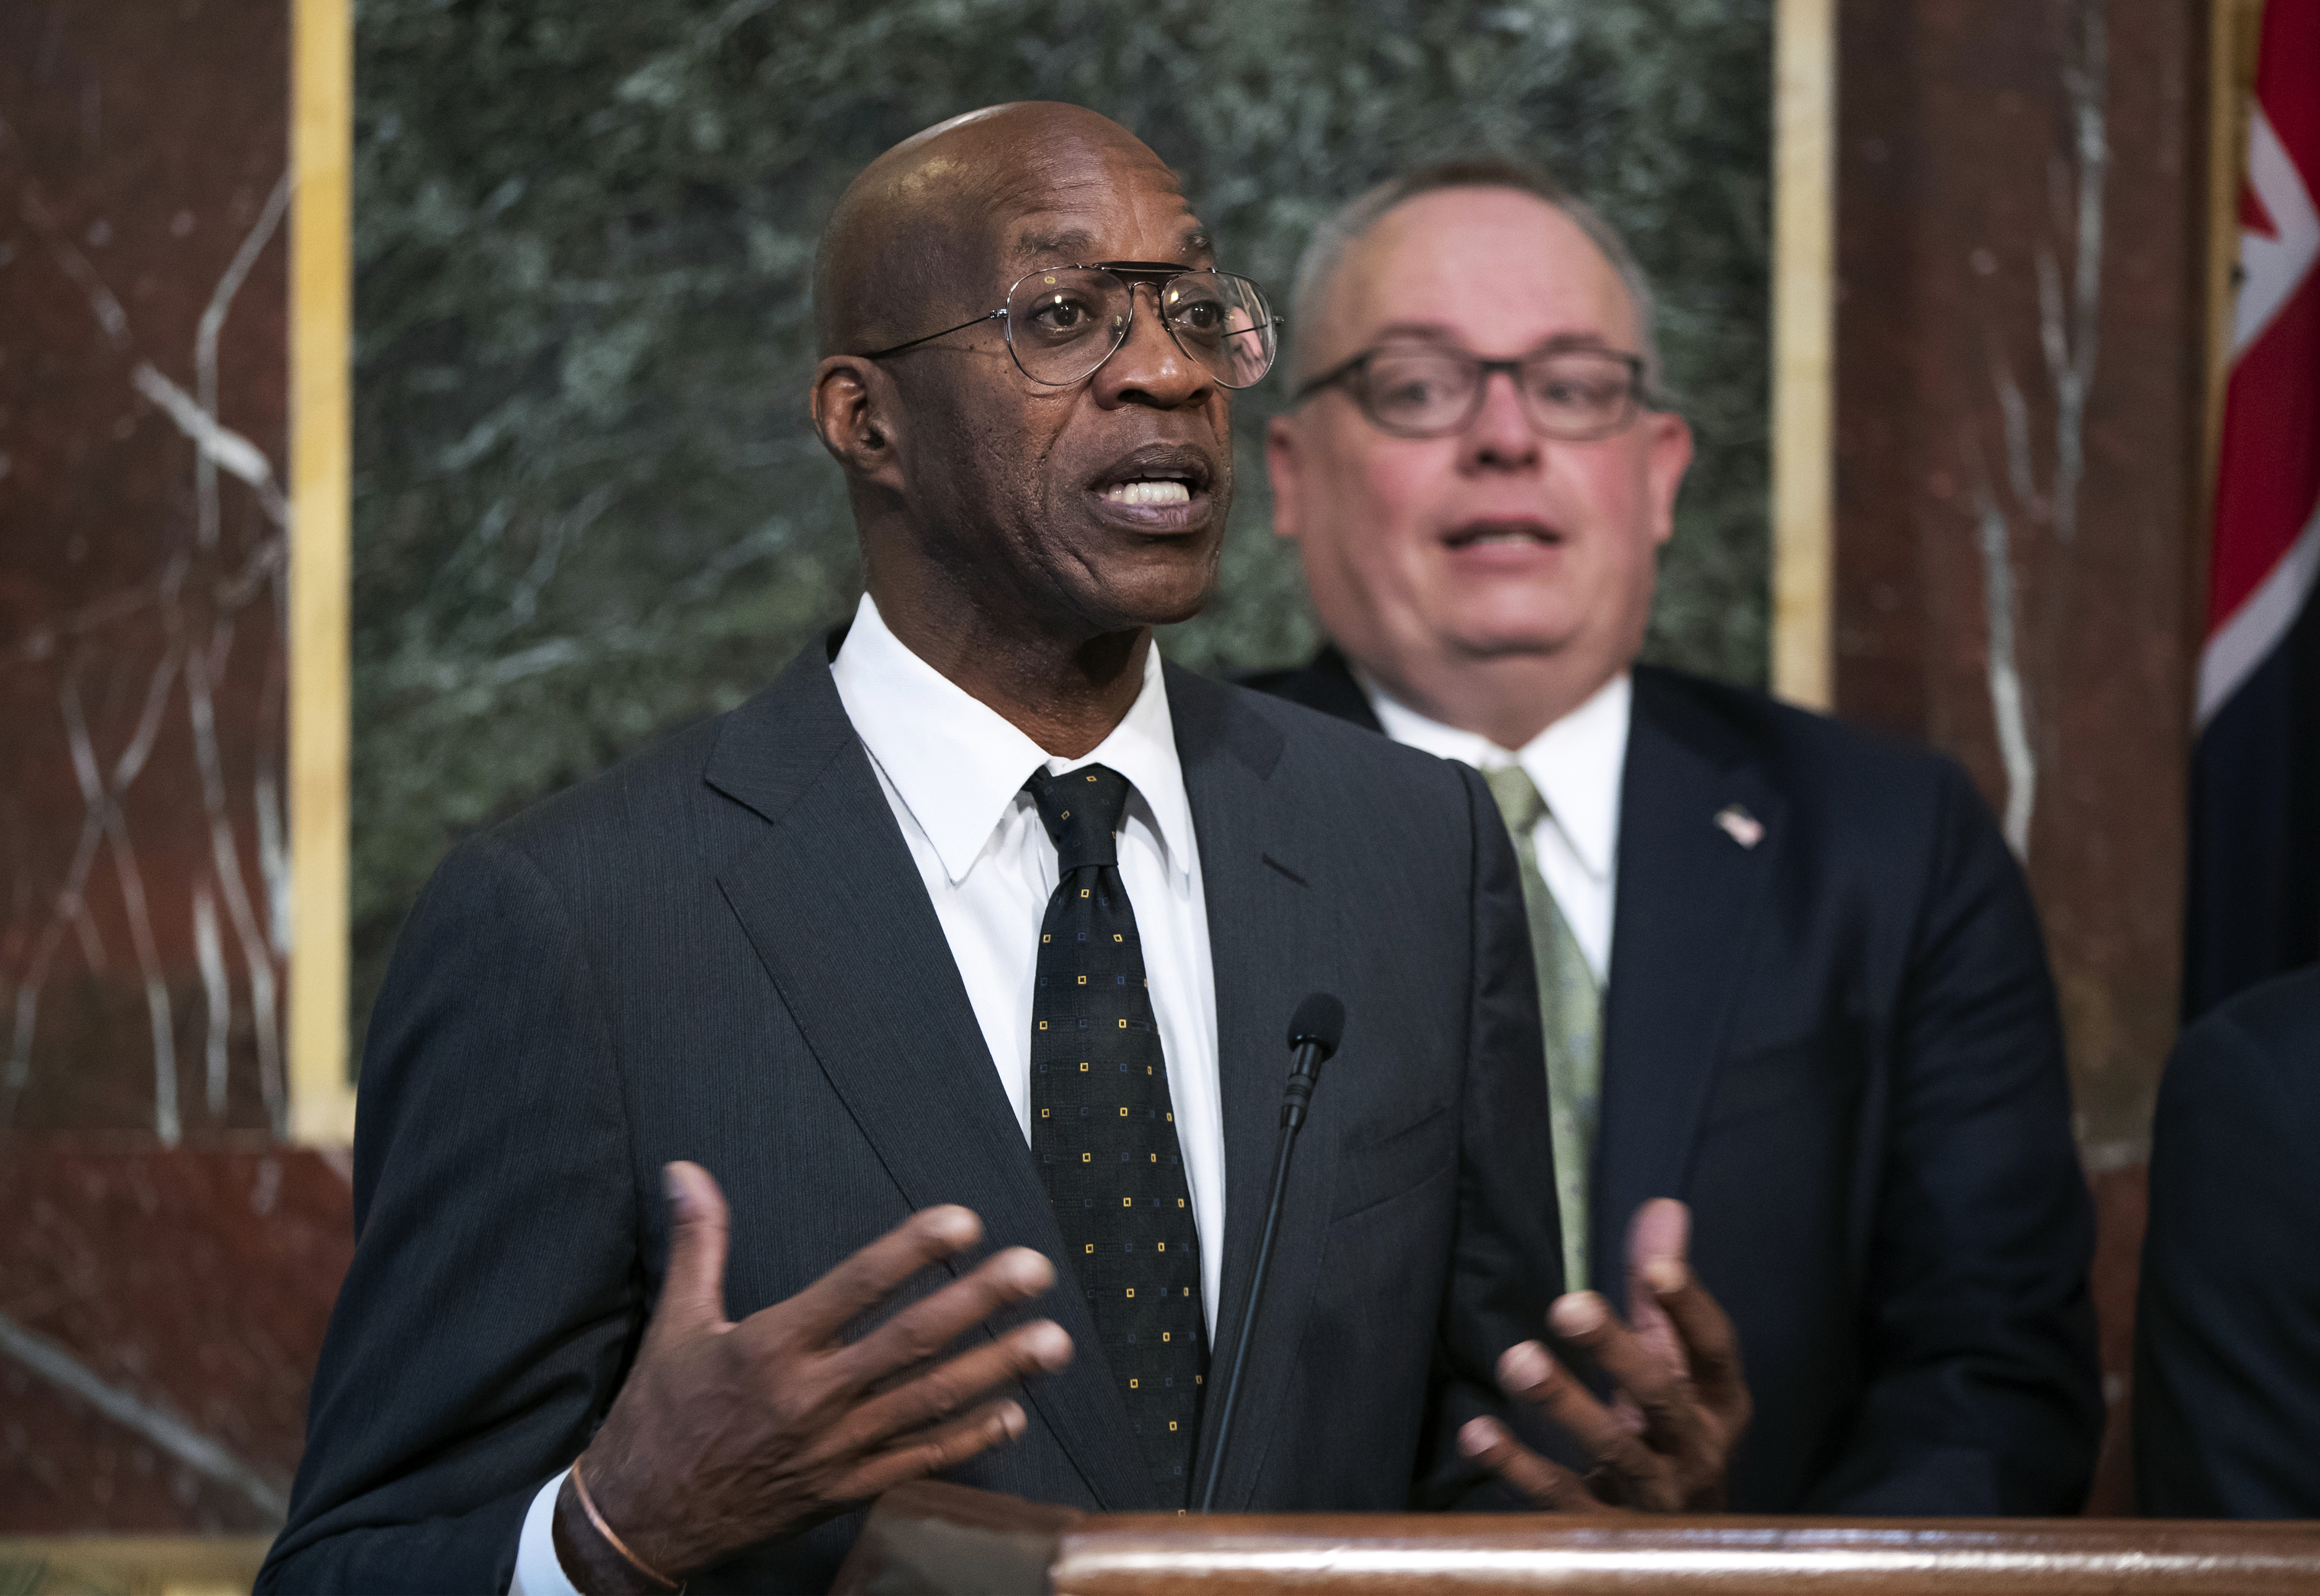 FILE - Edwin Moses, Chairman of the US Anti-Doping Agency, speaks at a press conference during a White House event to reform the World Anti-Doping Agency in Washington, October 31, 2018. Moses, US Gold Medalist Hurdler who played a key role in investigating Russian scandals , remembered how he tried to explain Moscow's point of view to anti-doping leaders. "One thing I always tried to get across to them was, 